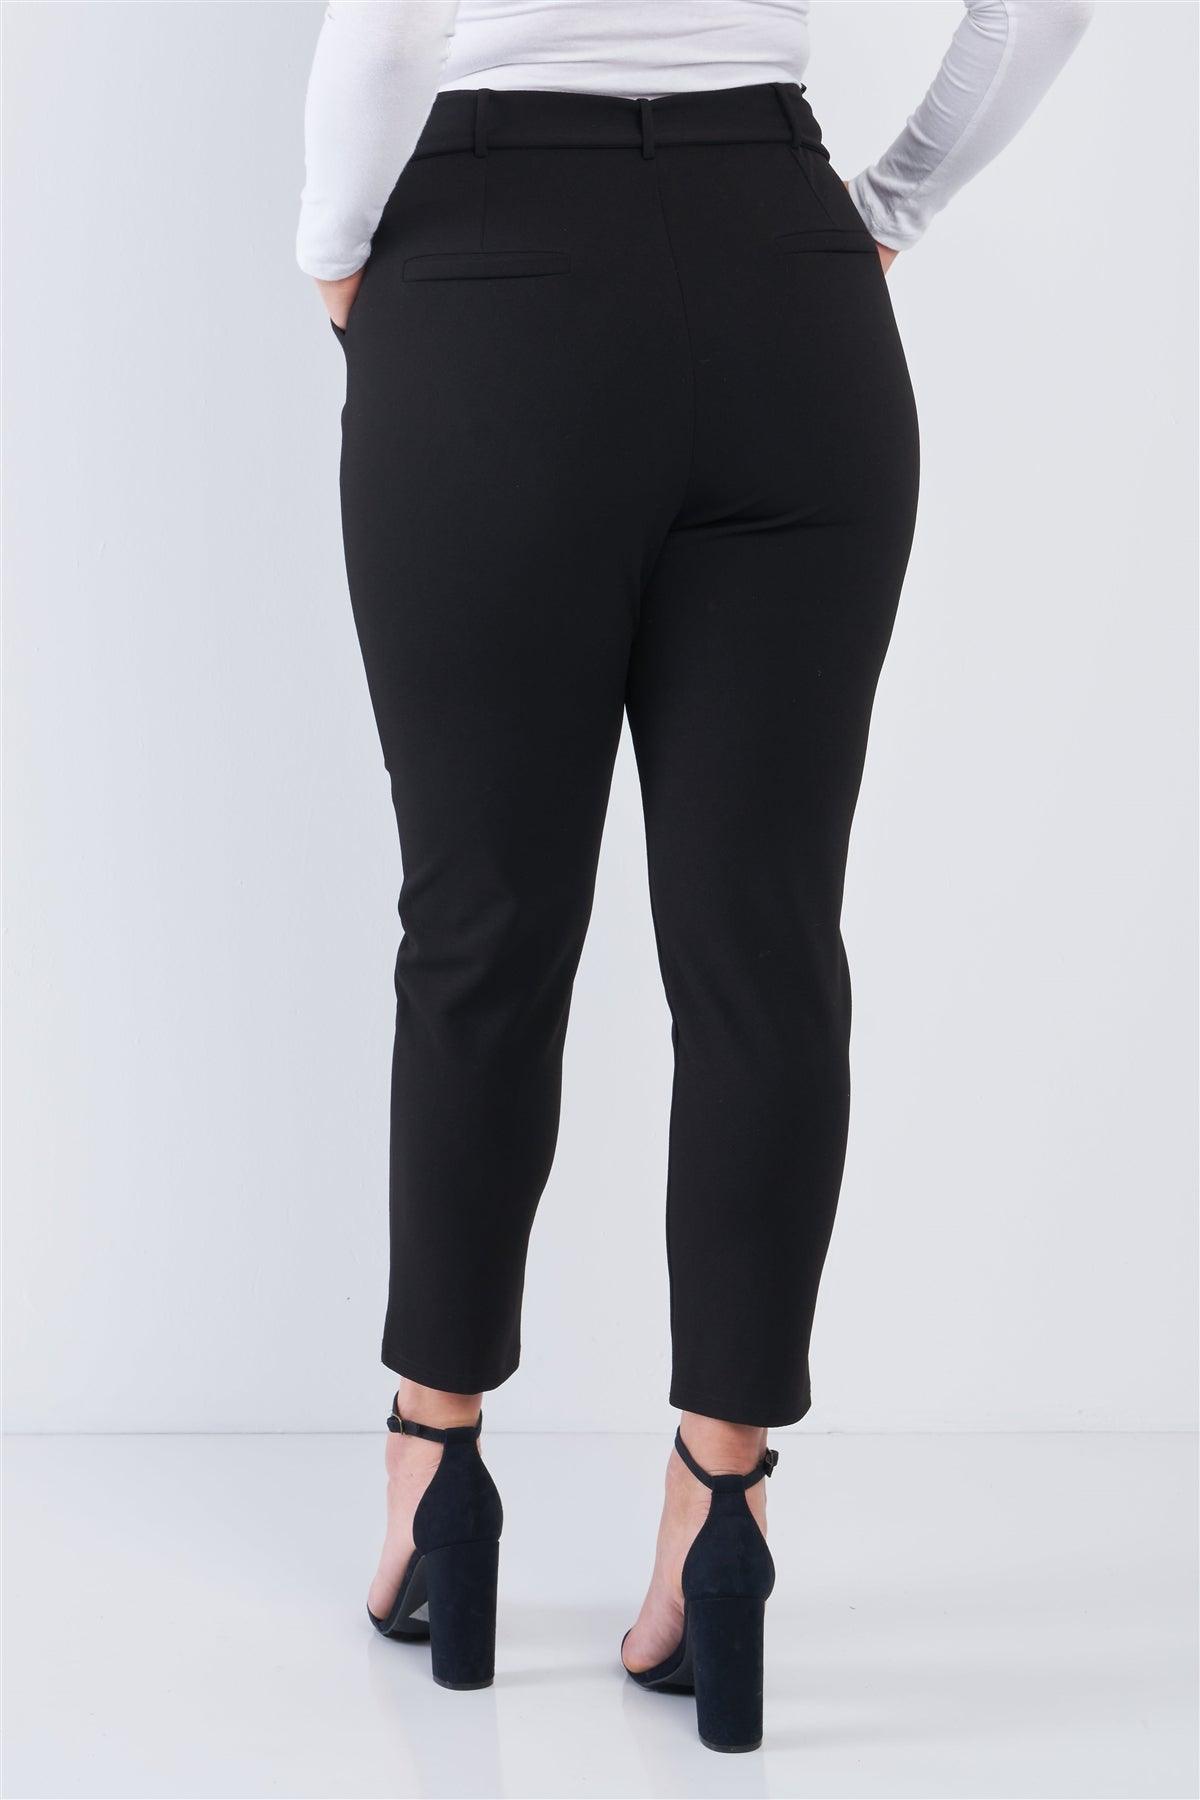 Junior Plus Size Black High Waisted Ankle Length Pants /2-2-2